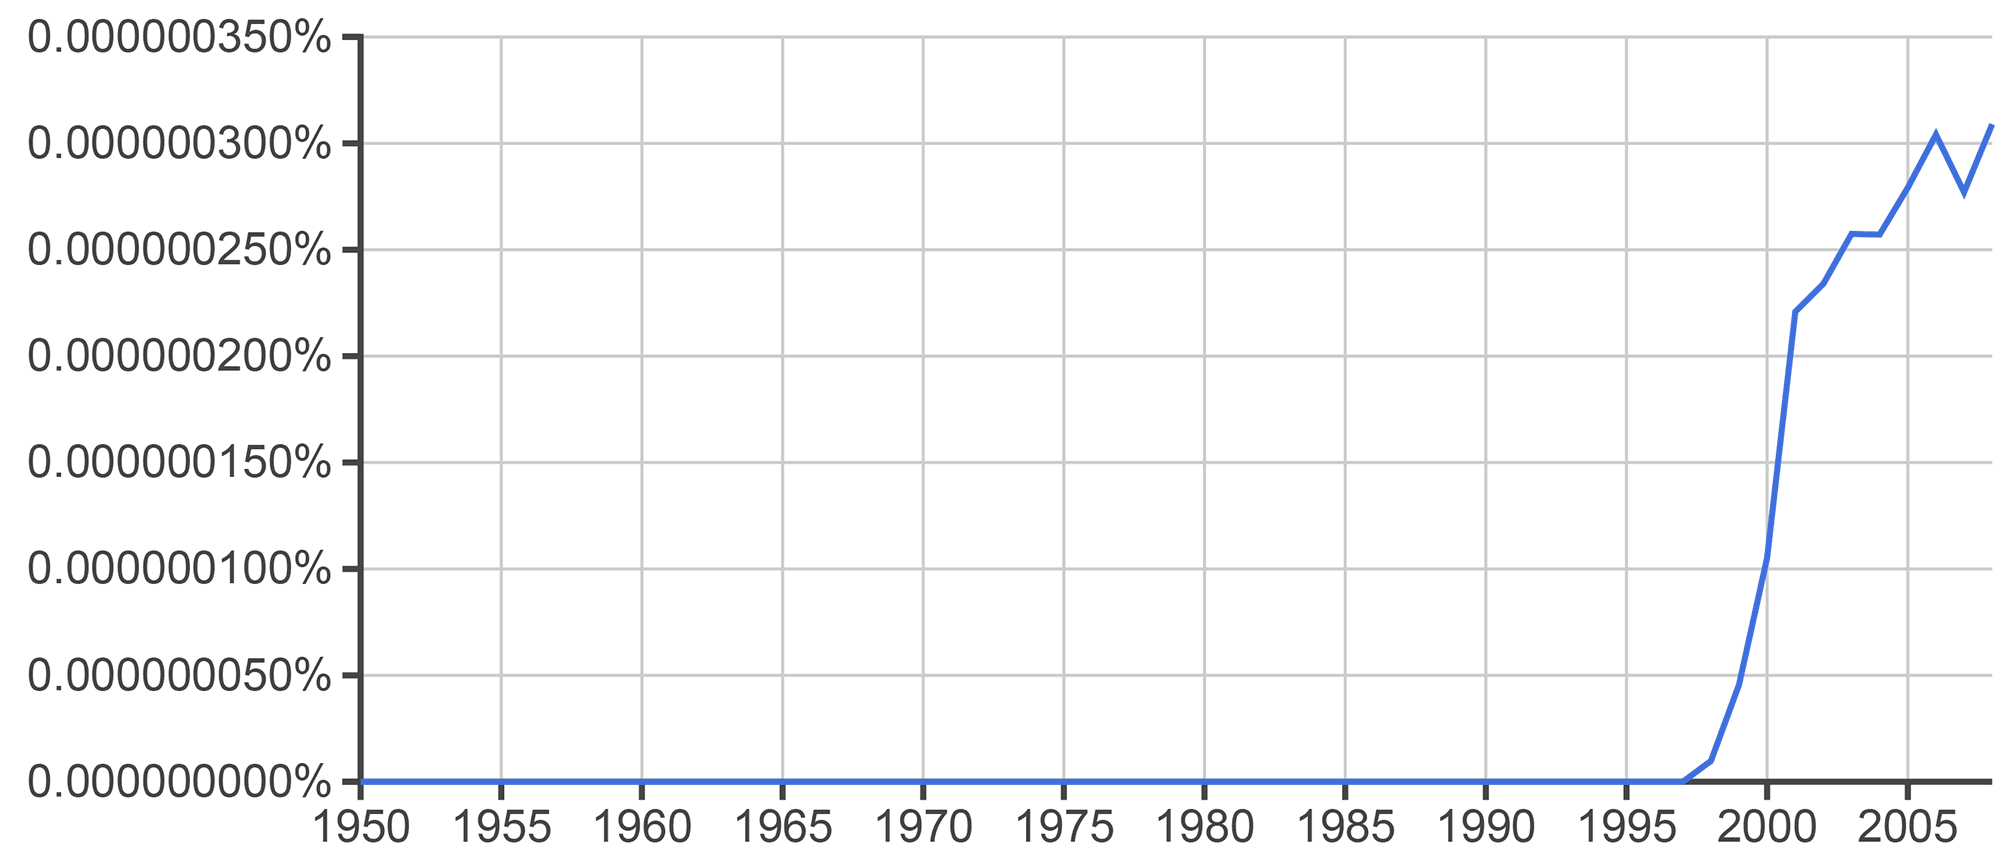 N-gram of books about going viral